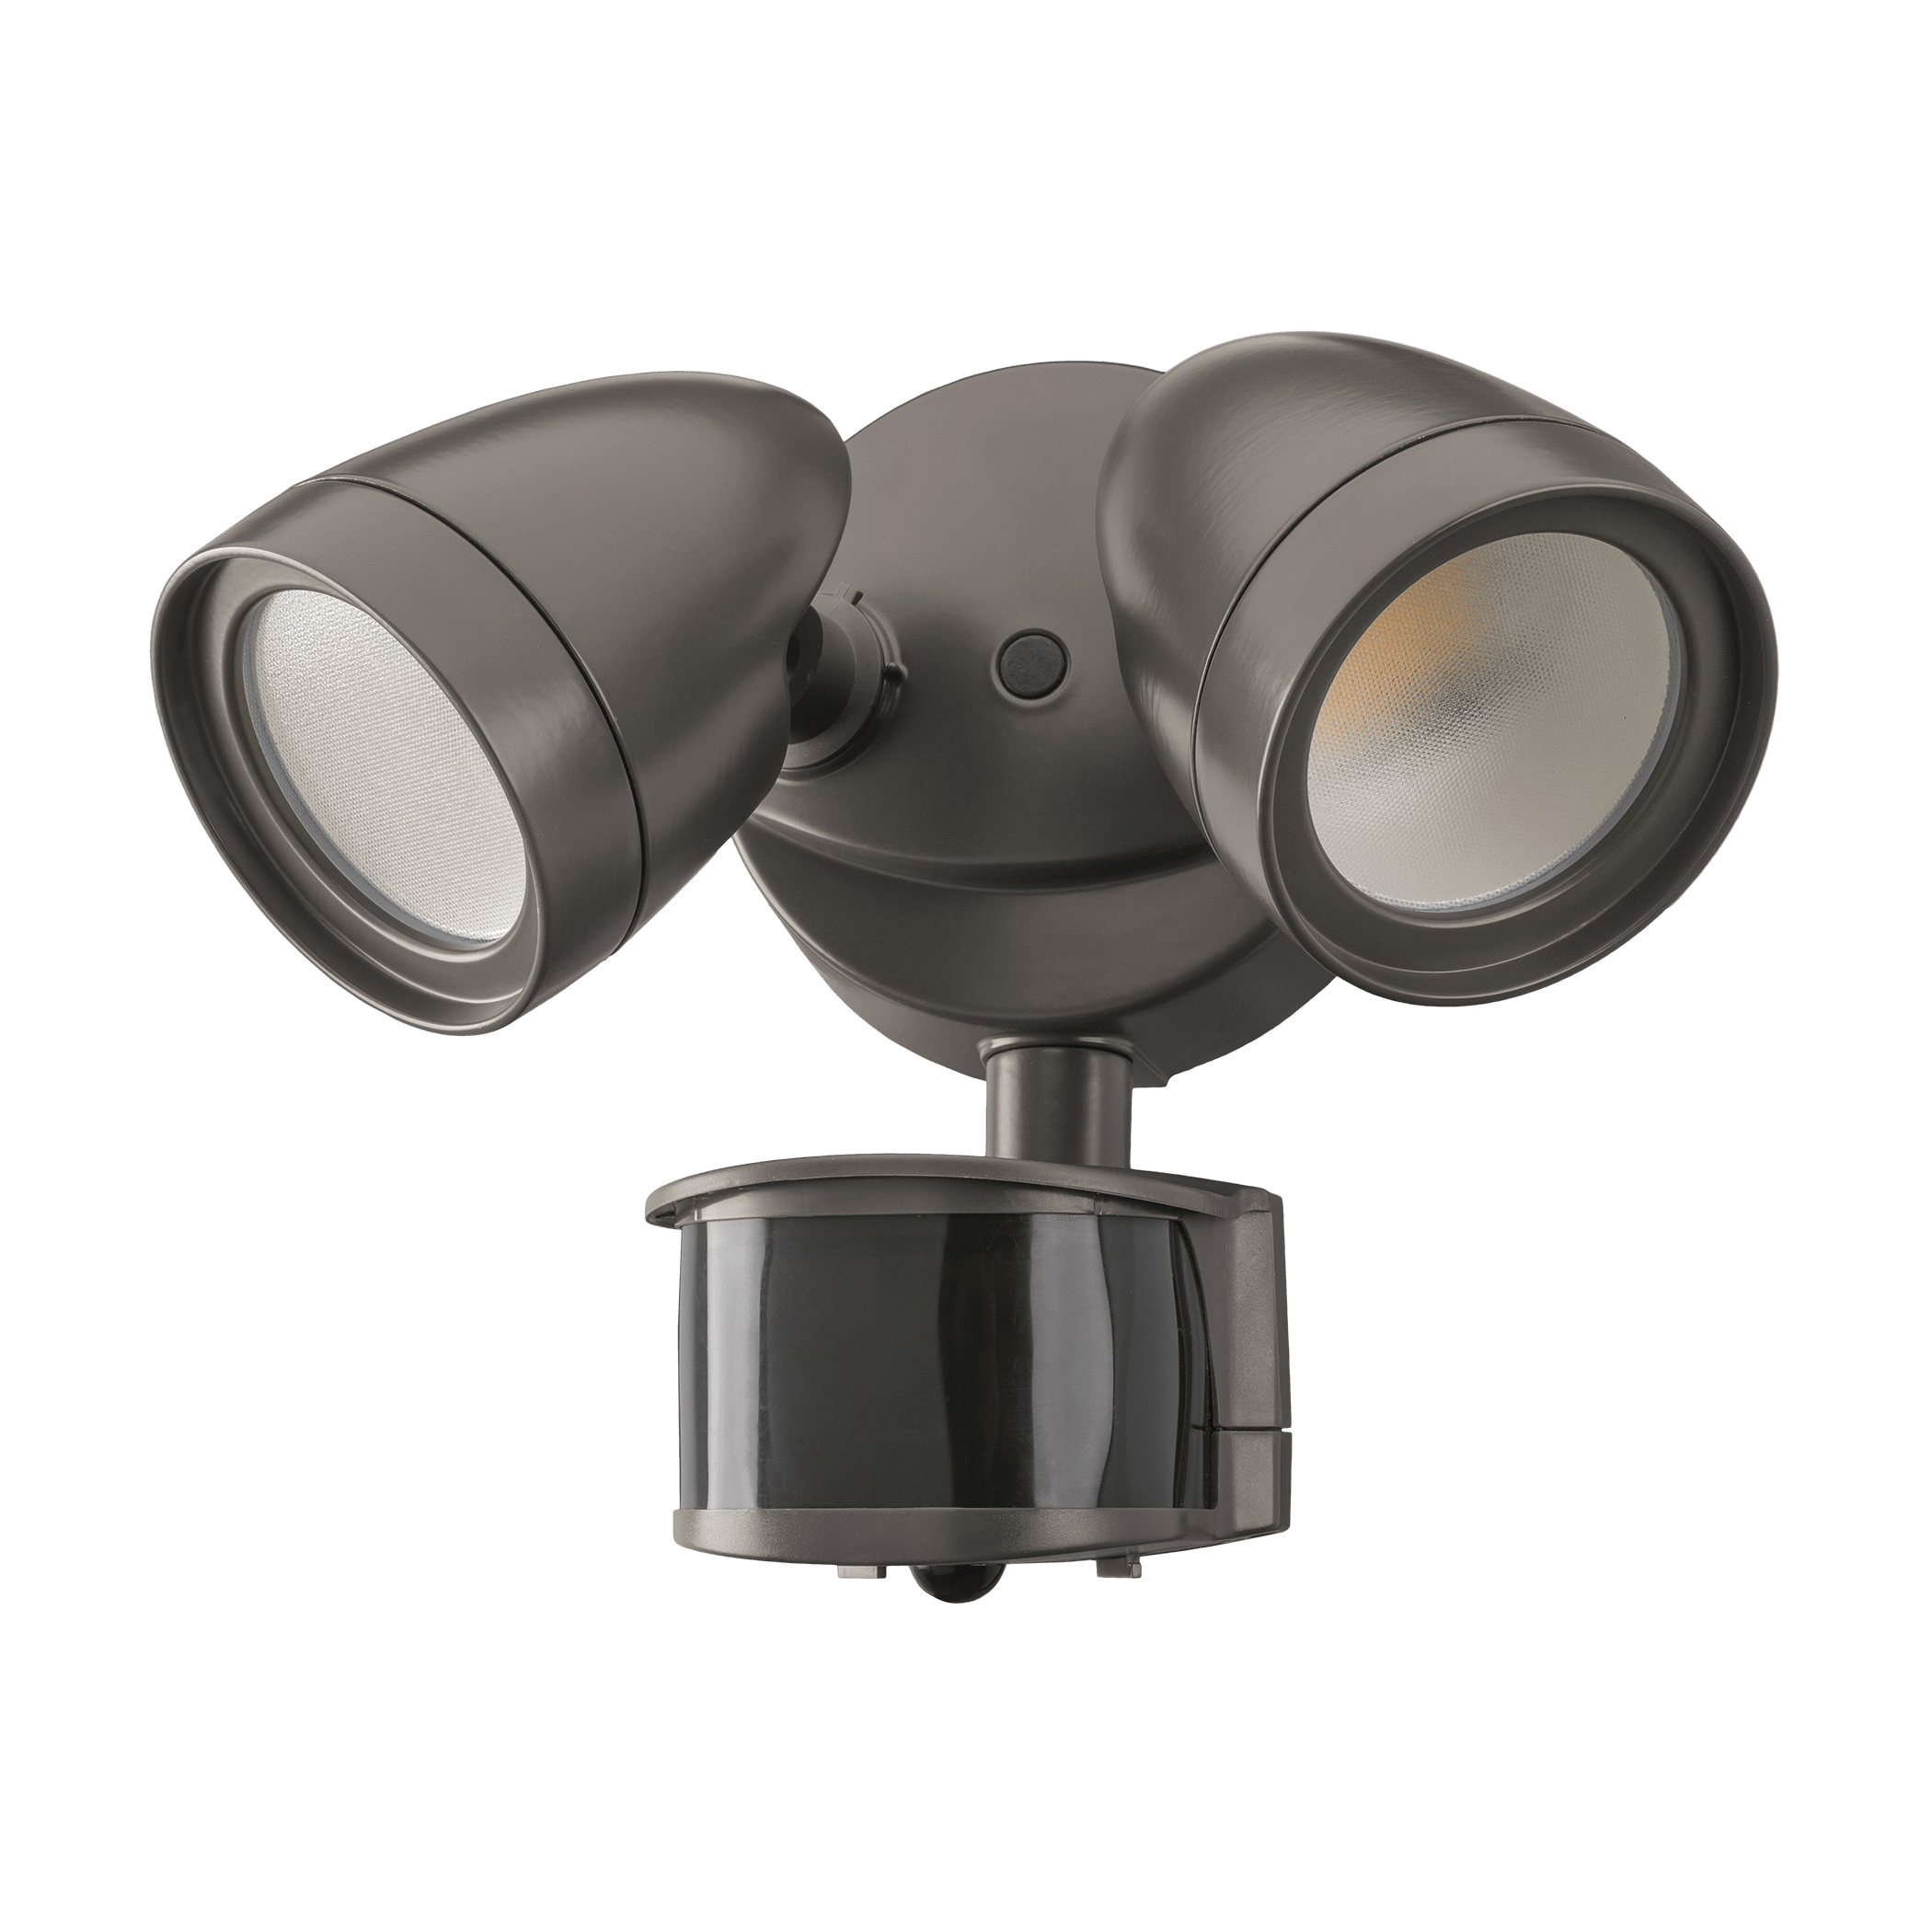 SC-2HD-2400LM-8-CP3-SV-BZ Security Light, 120 VAC, 7, 14 W, 2-Lamp, LED Lamp, 600 to 1200 Lumens